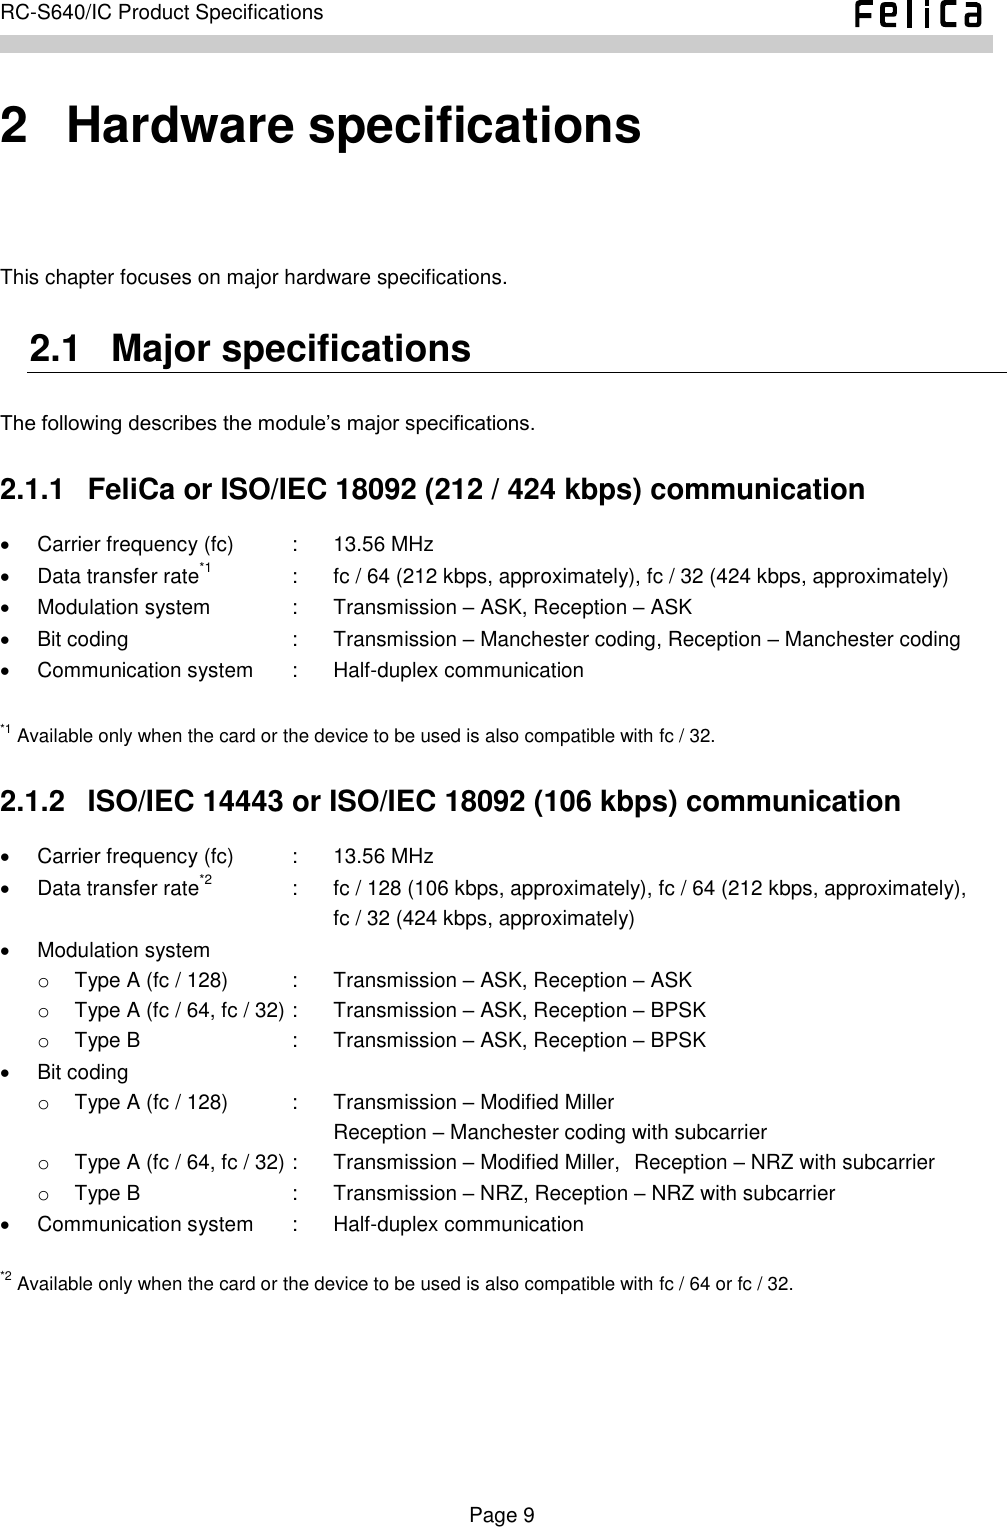    Page 9     RC-S640/IC Product Specifications    2   Hardware specifications This chapter focuses on major hardware specifications. 2.1   Major specifications The following describes the module’s major specifications. 2.1.1   FeliCa or ISO/IEC 18092 (212 / 424 kbps) communication   Carrier frequency (fc)  :  13.56 MHz   Data transfer rate*1  :  fc / 64 (212 kbps, approximately), fc / 32 (424 kbps, approximately)   Modulation system  :  Transmission – ASK, Reception – ASK   Bit coding  :  Transmission – Manchester coding, Reception – Manchester coding   Communication system  :  Half-duplex communication  *1 Available only when the card or the device to be used is also compatible with fc / 32. 2.1.2   ISO/IEC 14443 or ISO/IEC 18092 (106 kbps) communication   Carrier frequency (fc)  :  13.56 MHz   Data transfer rate*2  :  fc / 128 (106 kbps, approximately), fc / 64 (212 kbps, approximately),       fc / 32 (424 kbps, approximately)   Modulation system o  Type A (fc / 128)  :  Transmission – ASK, Reception – ASK o  Type A (fc / 64, fc / 32) :  Transmission – ASK, Reception – BPSK o  Type B  :  Transmission – ASK, Reception – BPSK   Bit coding o  Type A (fc / 128)  :  Transmission – Modified Miller      Reception – Manchester coding with subcarrier o  Type A (fc / 64, fc / 32) :  Transmission – Modified Miller,  Reception – NRZ with subcarrier o  Type B  :  Transmission – NRZ, Reception – NRZ with subcarrier   Communication system  :  Half-duplex communication  *2 Available only when the card or the device to be used is also compatible with fc / 64 or fc / 32.    